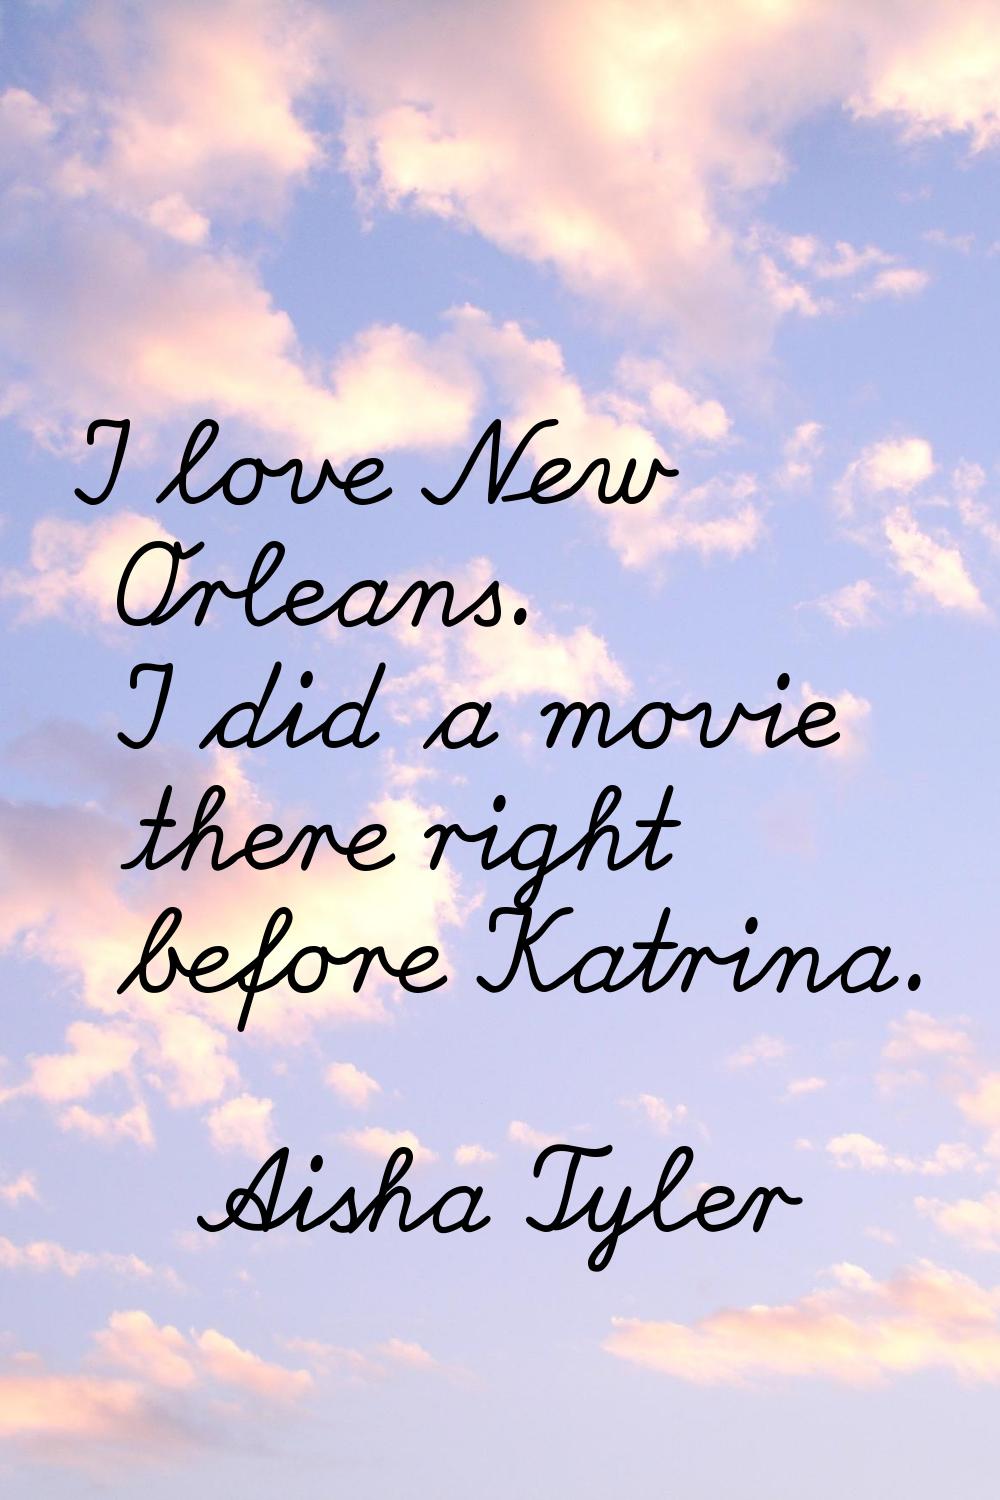 I love New Orleans. I did a movie there right before Katrina.